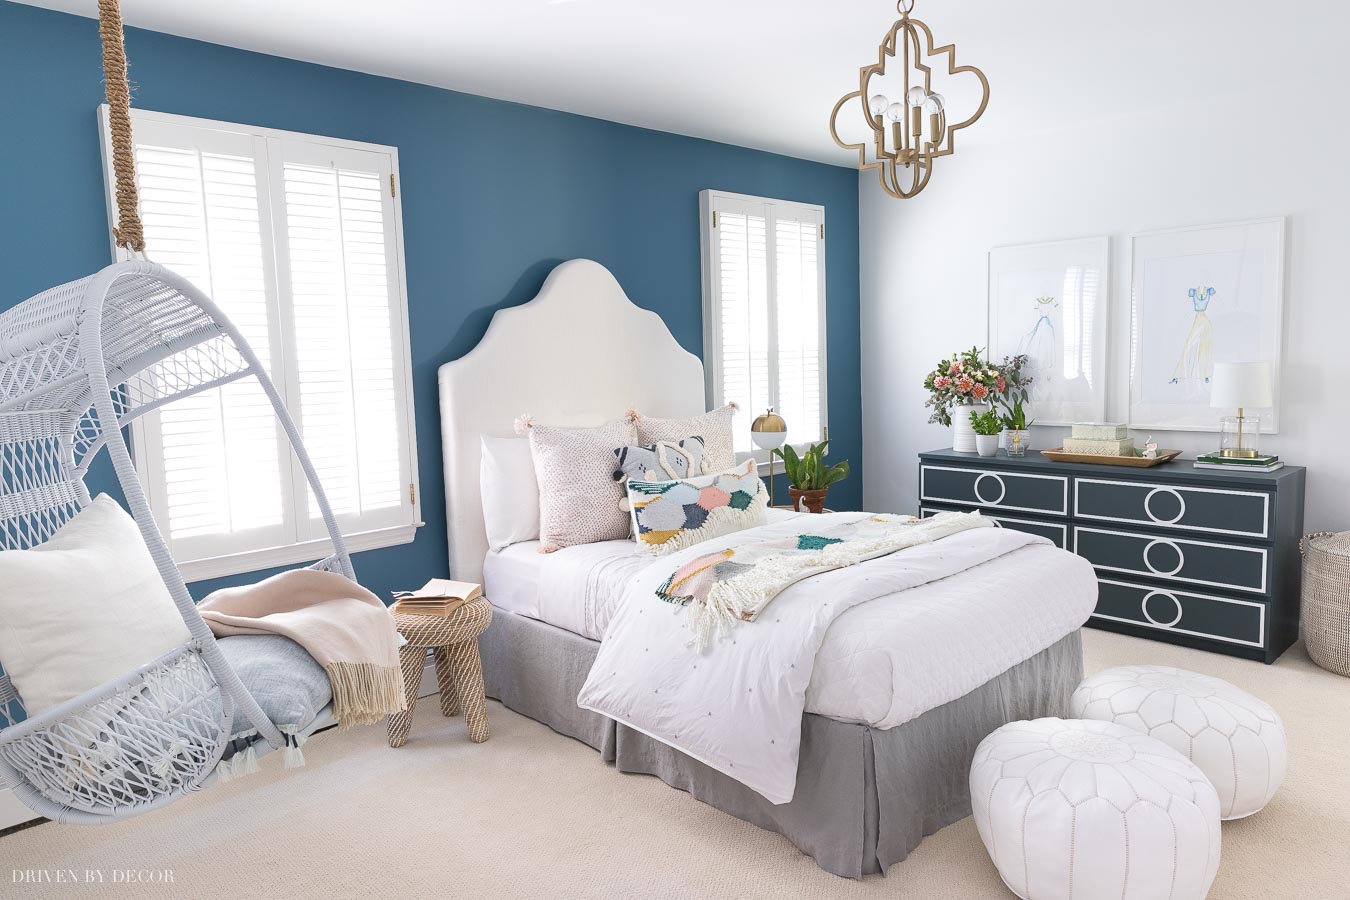 Love the blue accent wall (Behr Marquee's Blueprint paint color) in this boho chic bedroom!